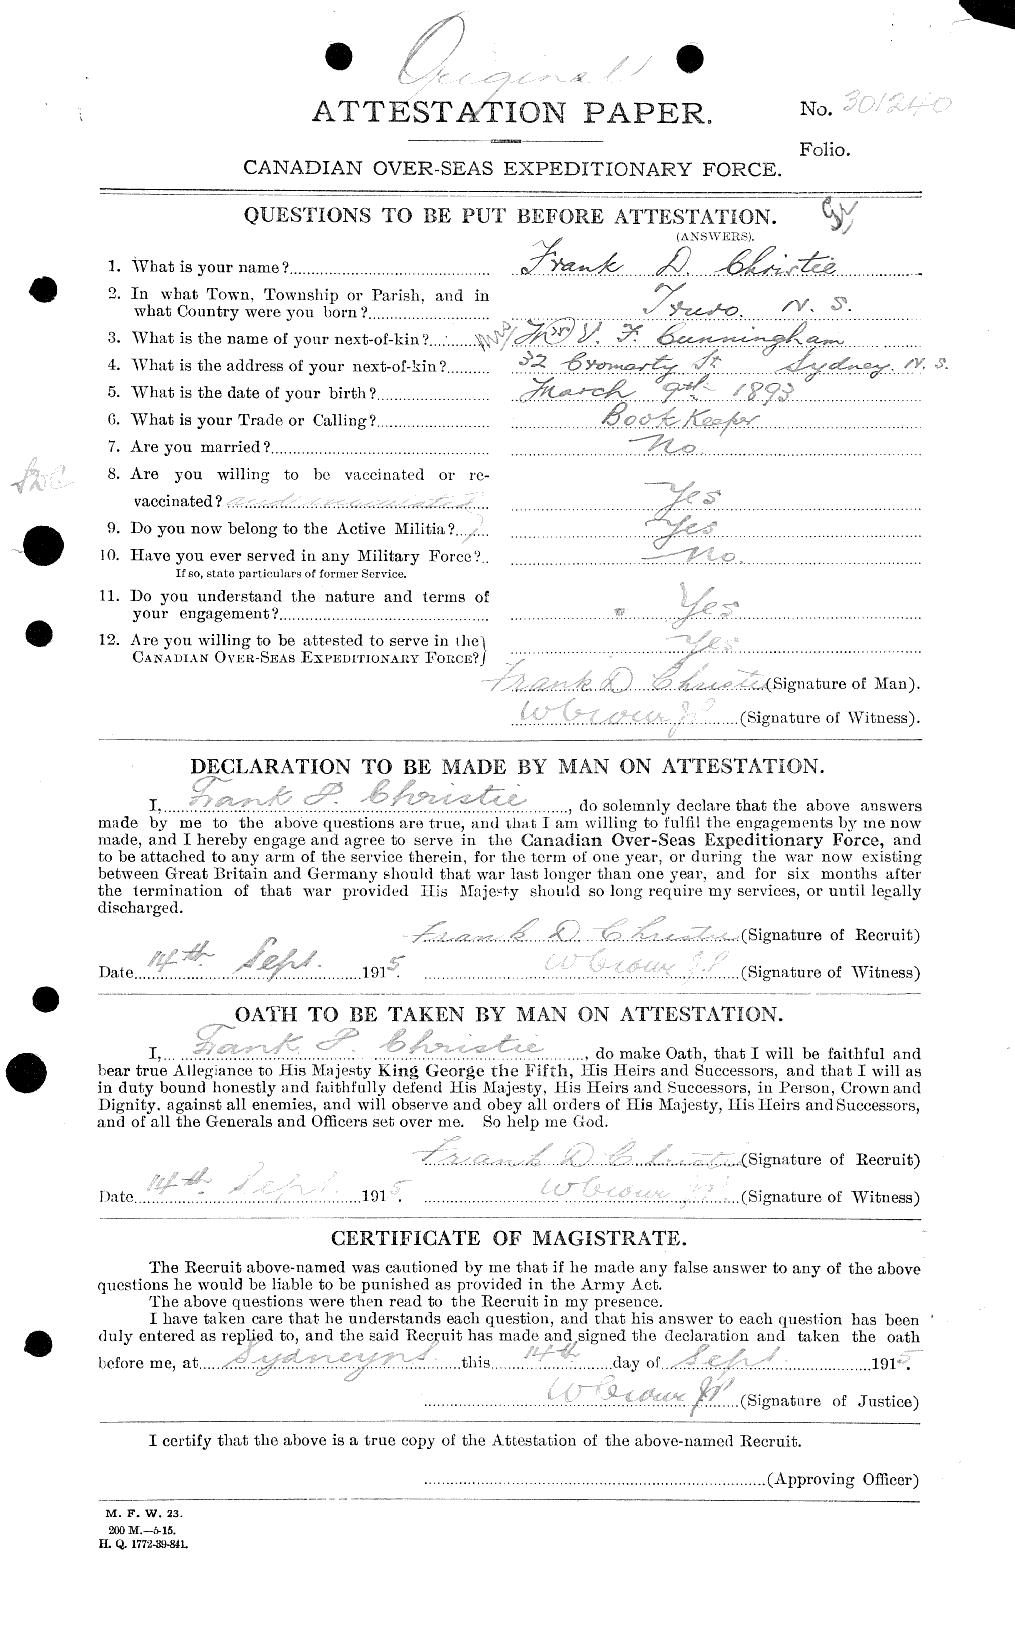 Personnel Records of the First World War - CEF 021926a